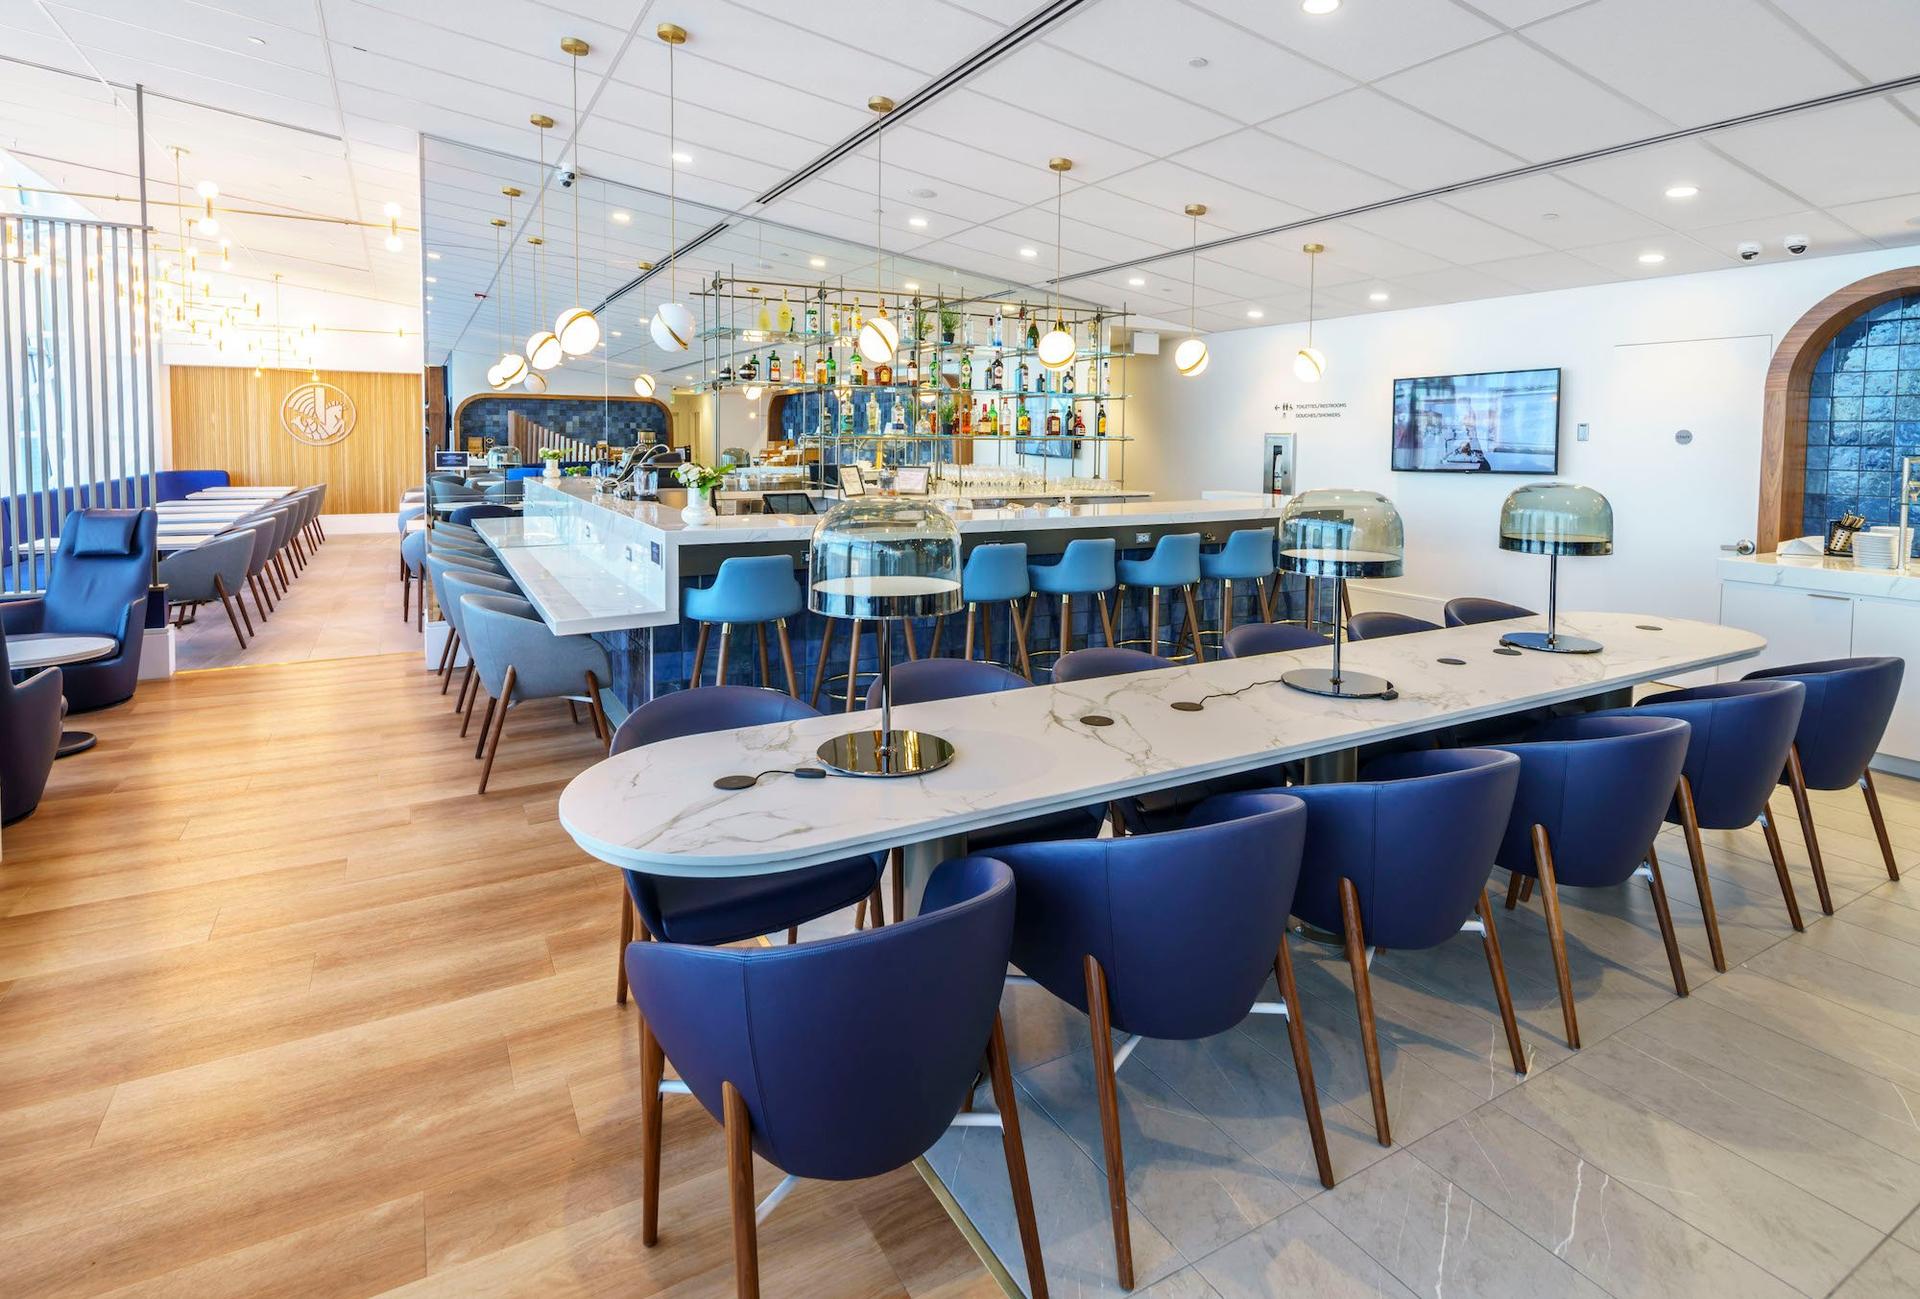 Air France/KLM Lounge operated by Plaza Premium Group image 7 of 10